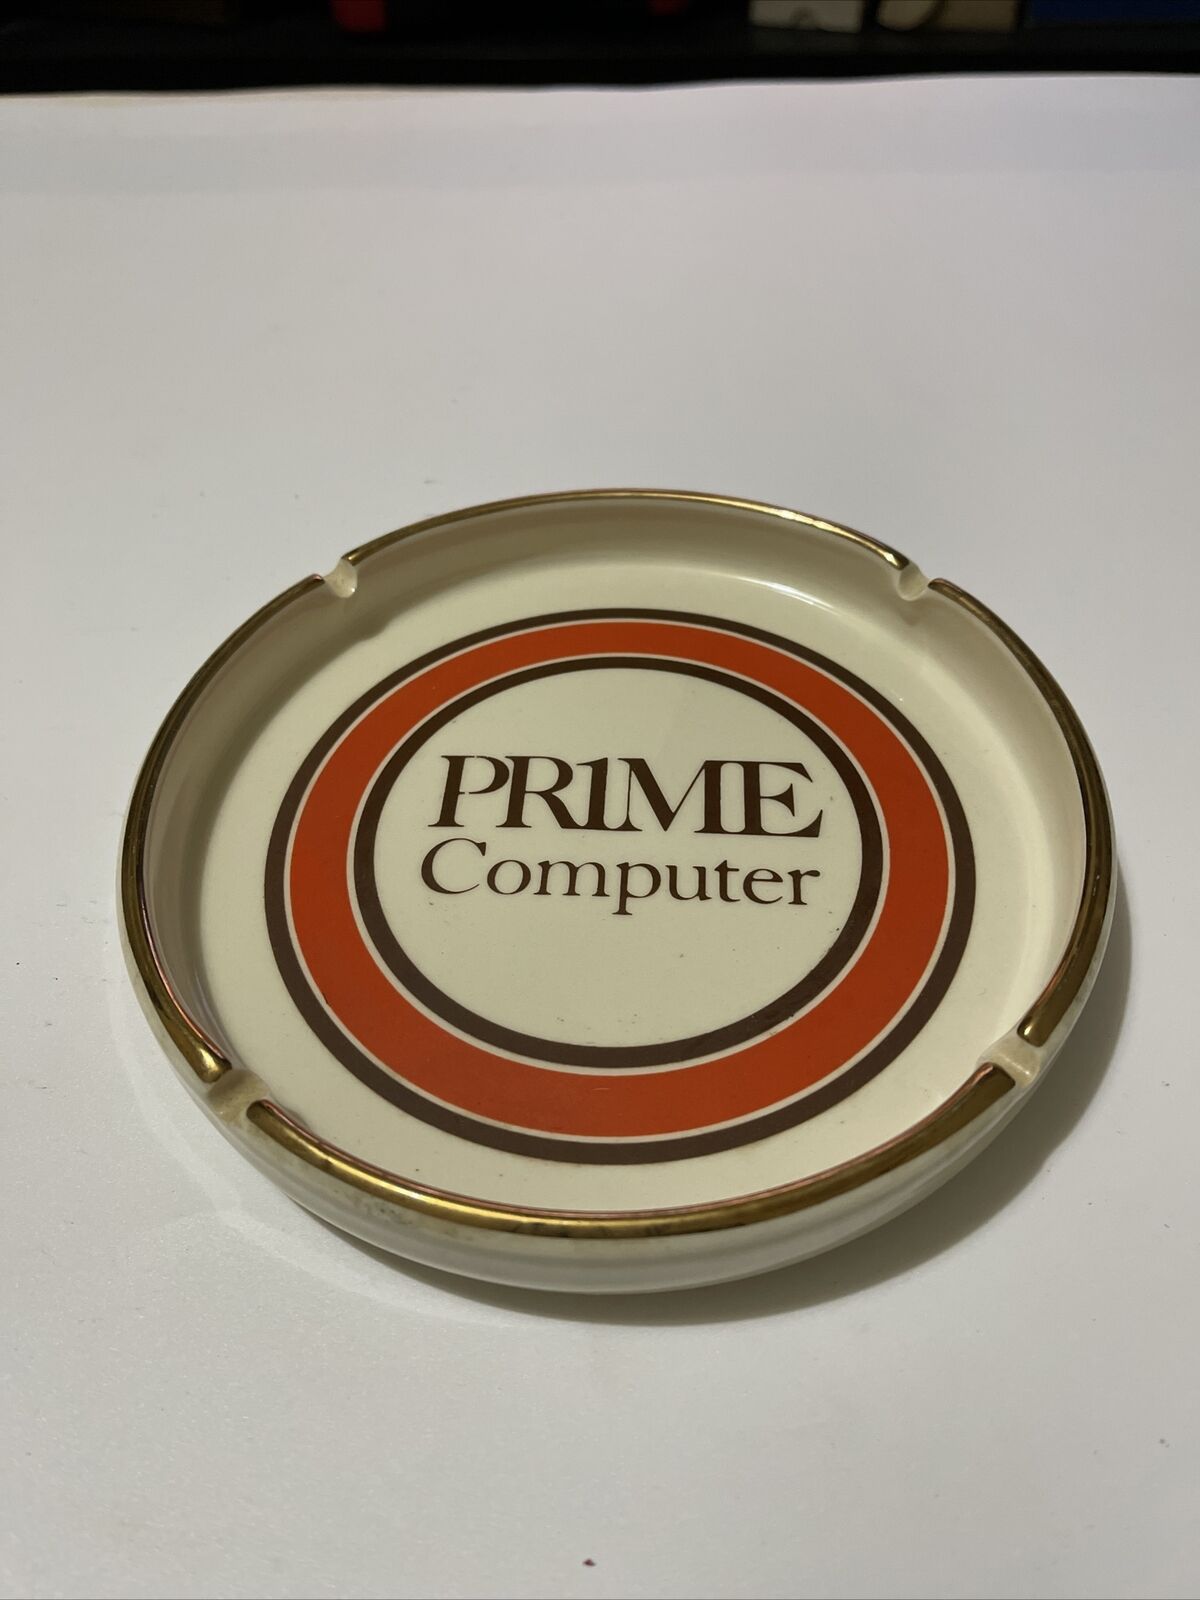 Vintage 1970’s PR1ME Computer Ashtray *RARE* You’ll Never See Another One